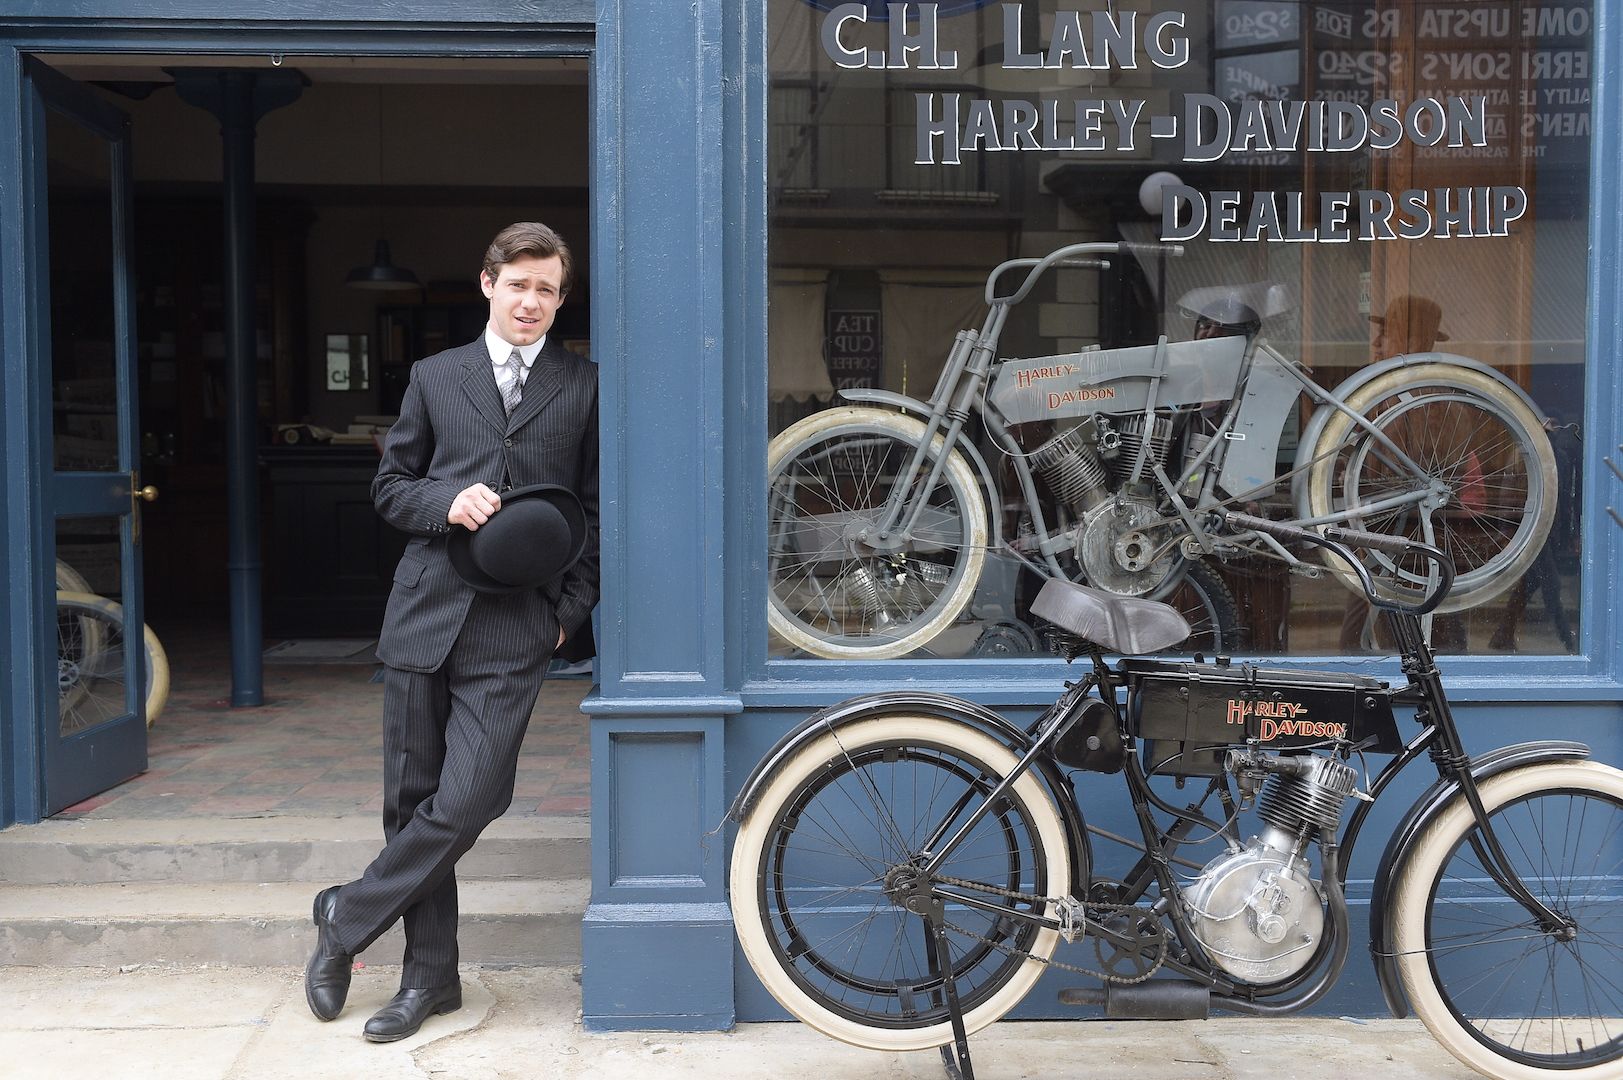 Harley and the Davidsons